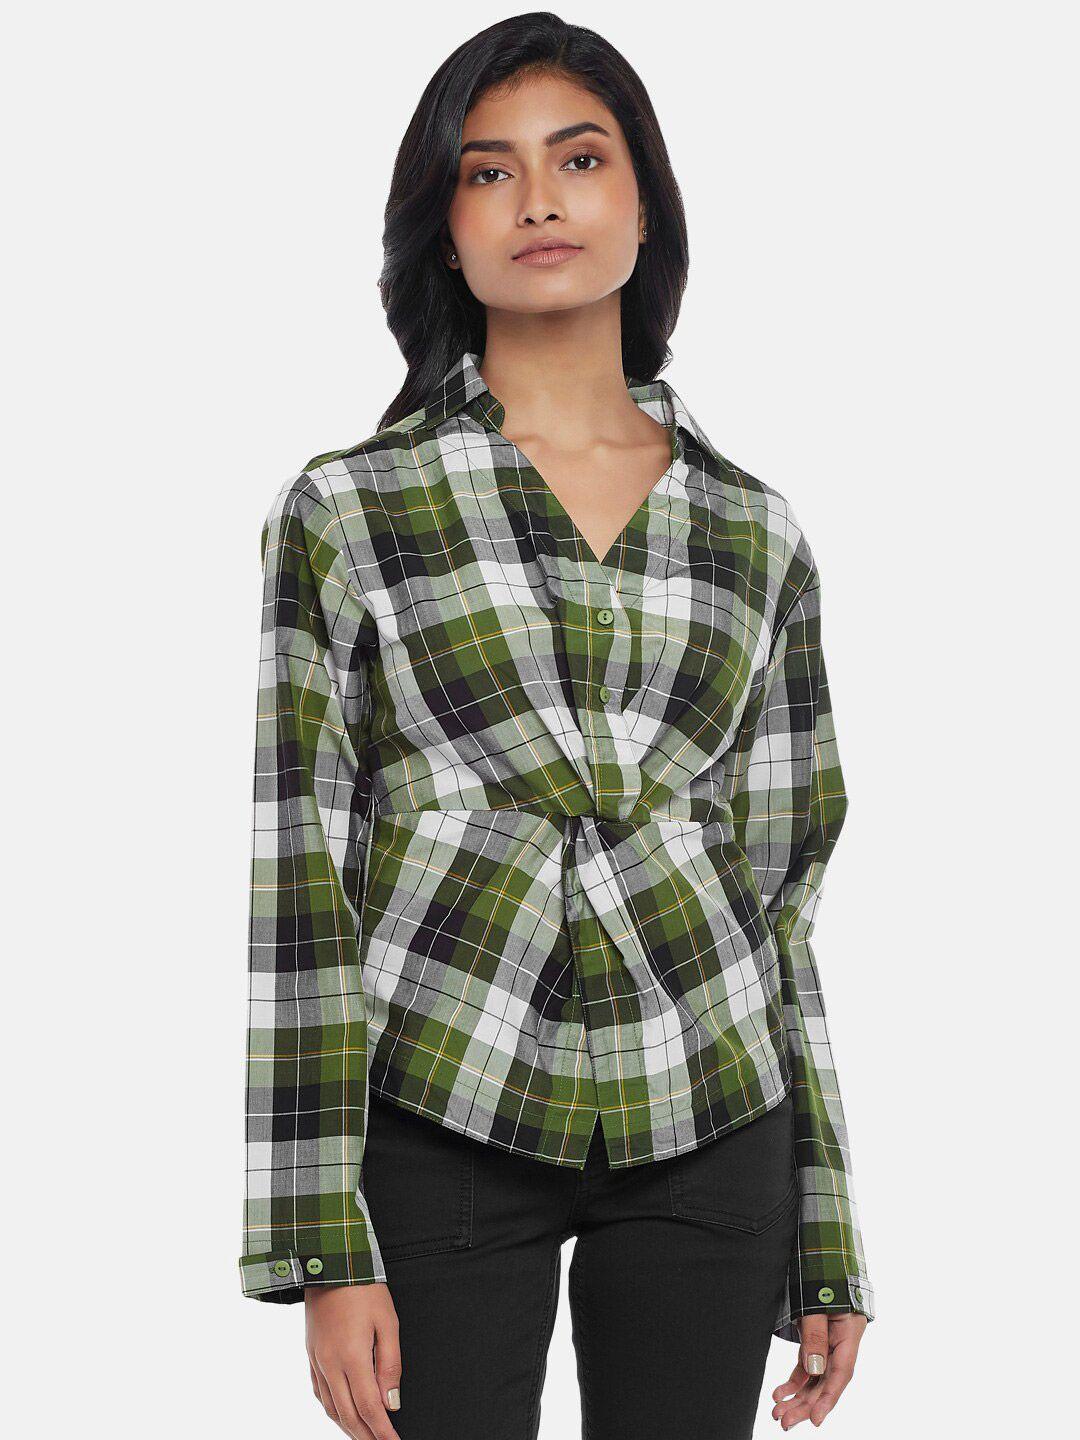 sf-jeans-by-pantaloons-women-olive-green-tartan-checked-casual-shirt